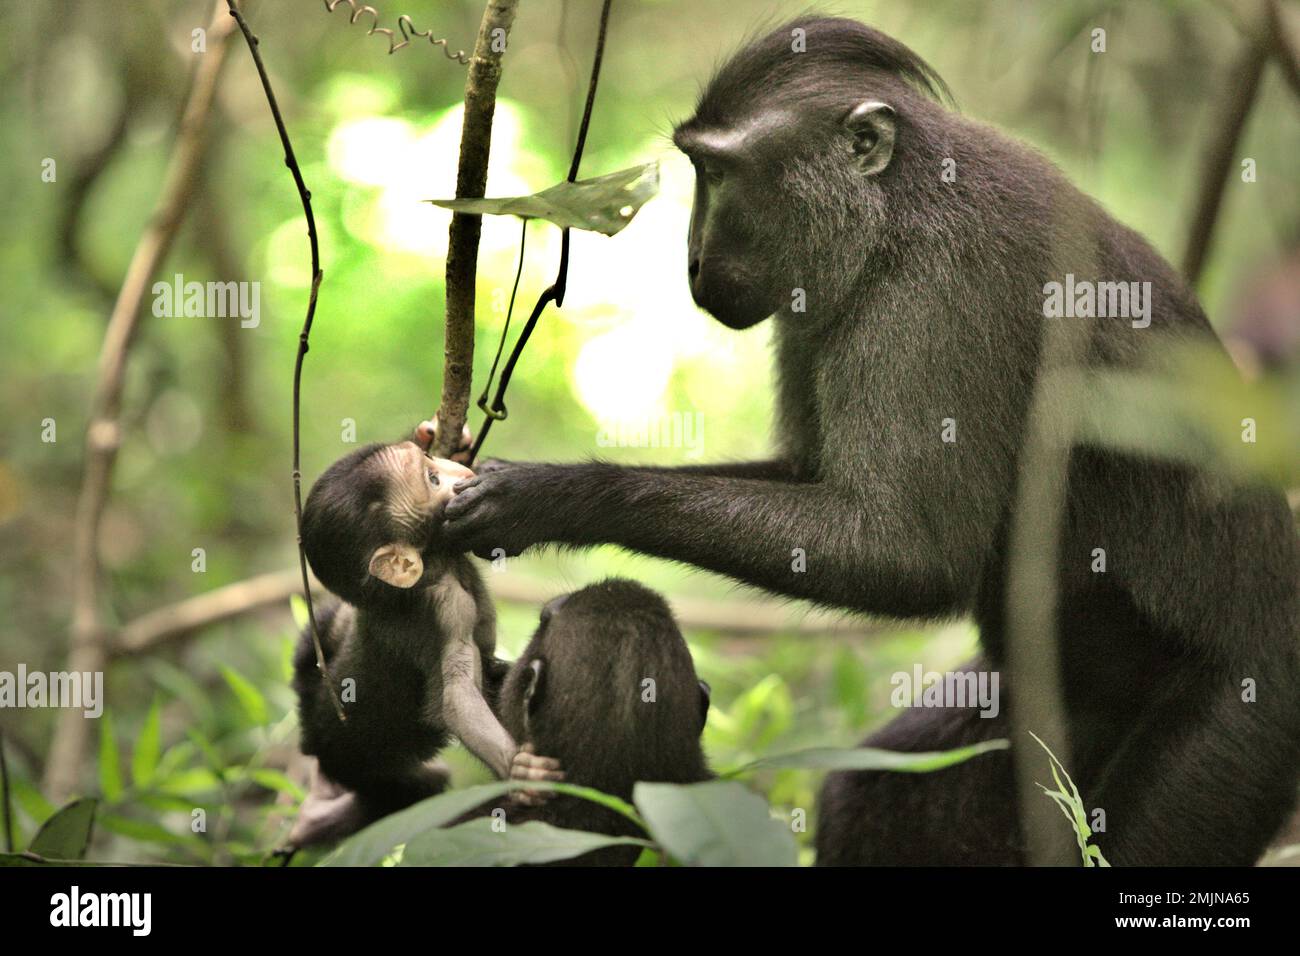 A Sulawesi black-crested macaque (Macaca nigra) adult female is comforting an infant during weaning period in their natural habitat, lowland rainforest in Tangkoko Nature Reserve, North Sulawesi, Indonesia. Weaning period of a crested macaque infant—from 5 months of age until 1-year of age—is the earliest phase of life where infant mortality is the highest. Primate scientists from Macaca Nigra Project observed that '17 of the 78 infants (22%) disappeared in their first year of life. Eight of these 17 infants' dead bodies were found with large puncture wounds.' Meanwhile, climate change impact. Stock Photo